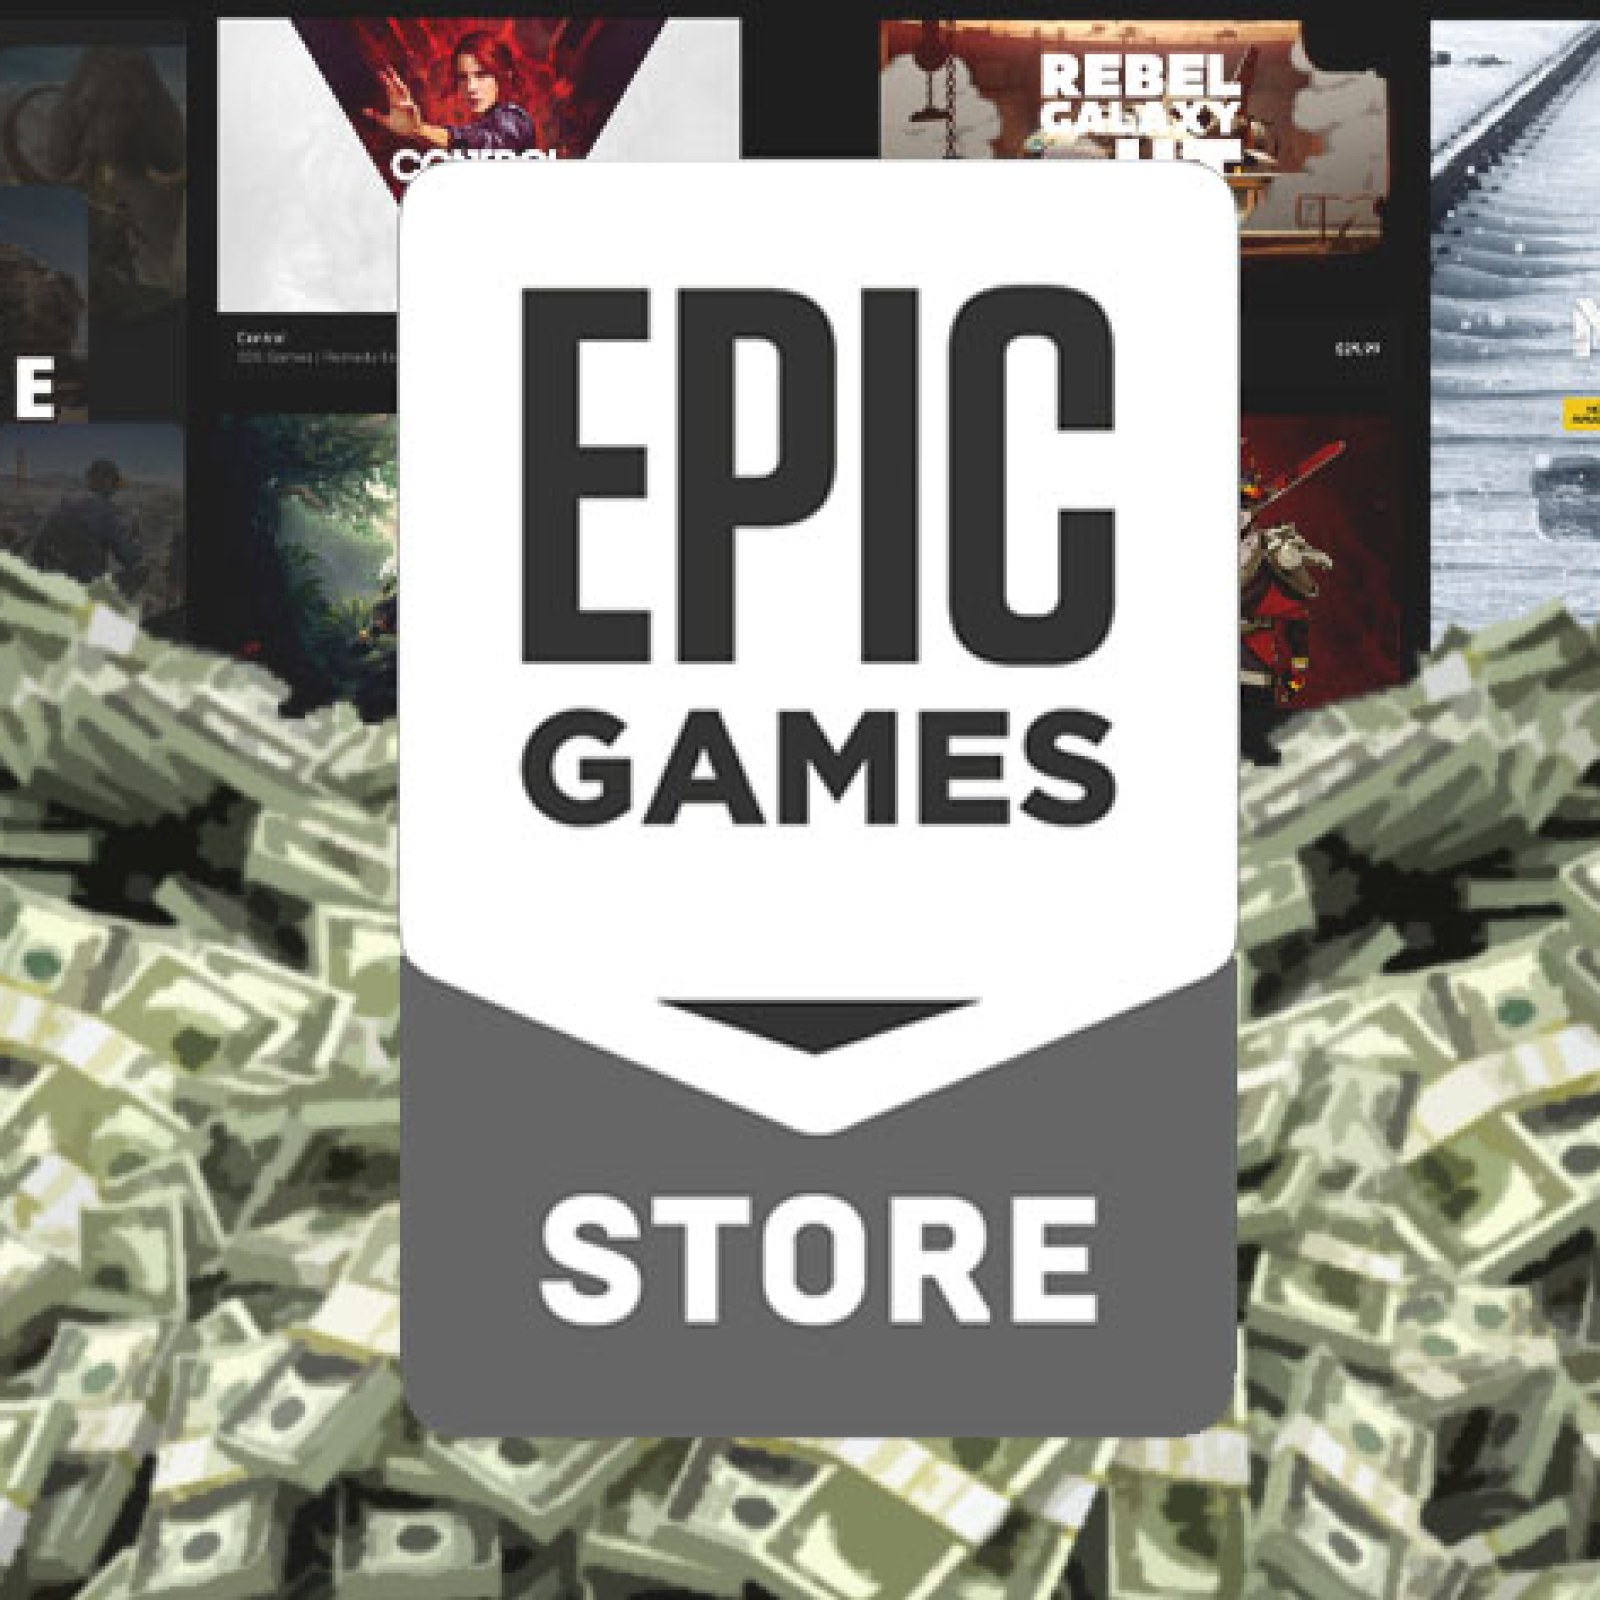 Epic Games Store Update - Epic Games Store